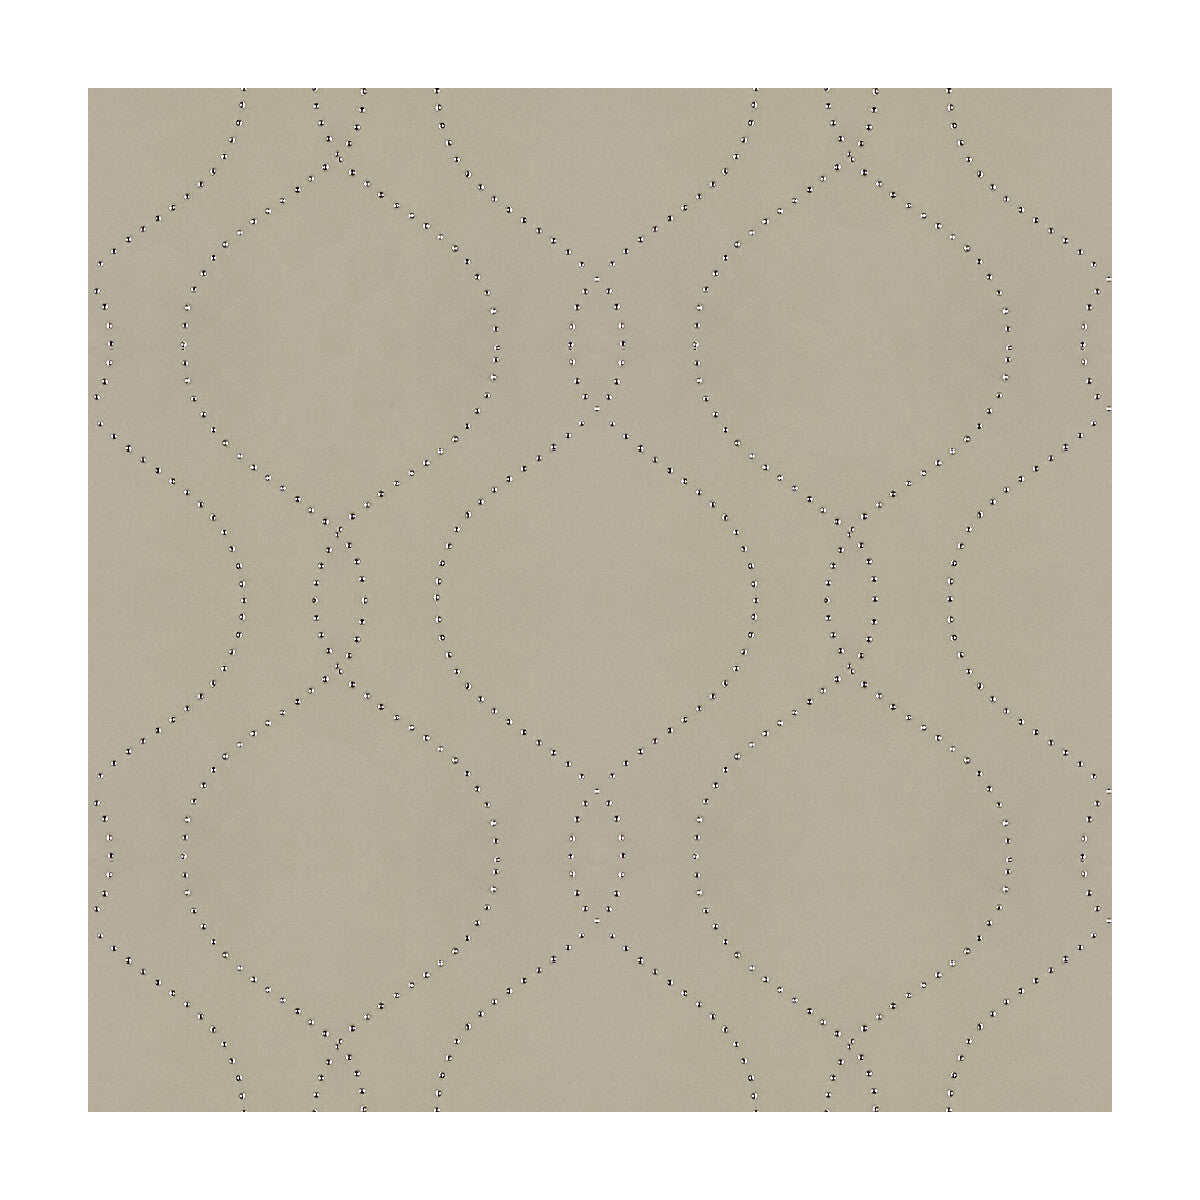 Avah fabric in pewter color - pattern 4197.16.0 - by Kravet Design in the Candice Olson collection